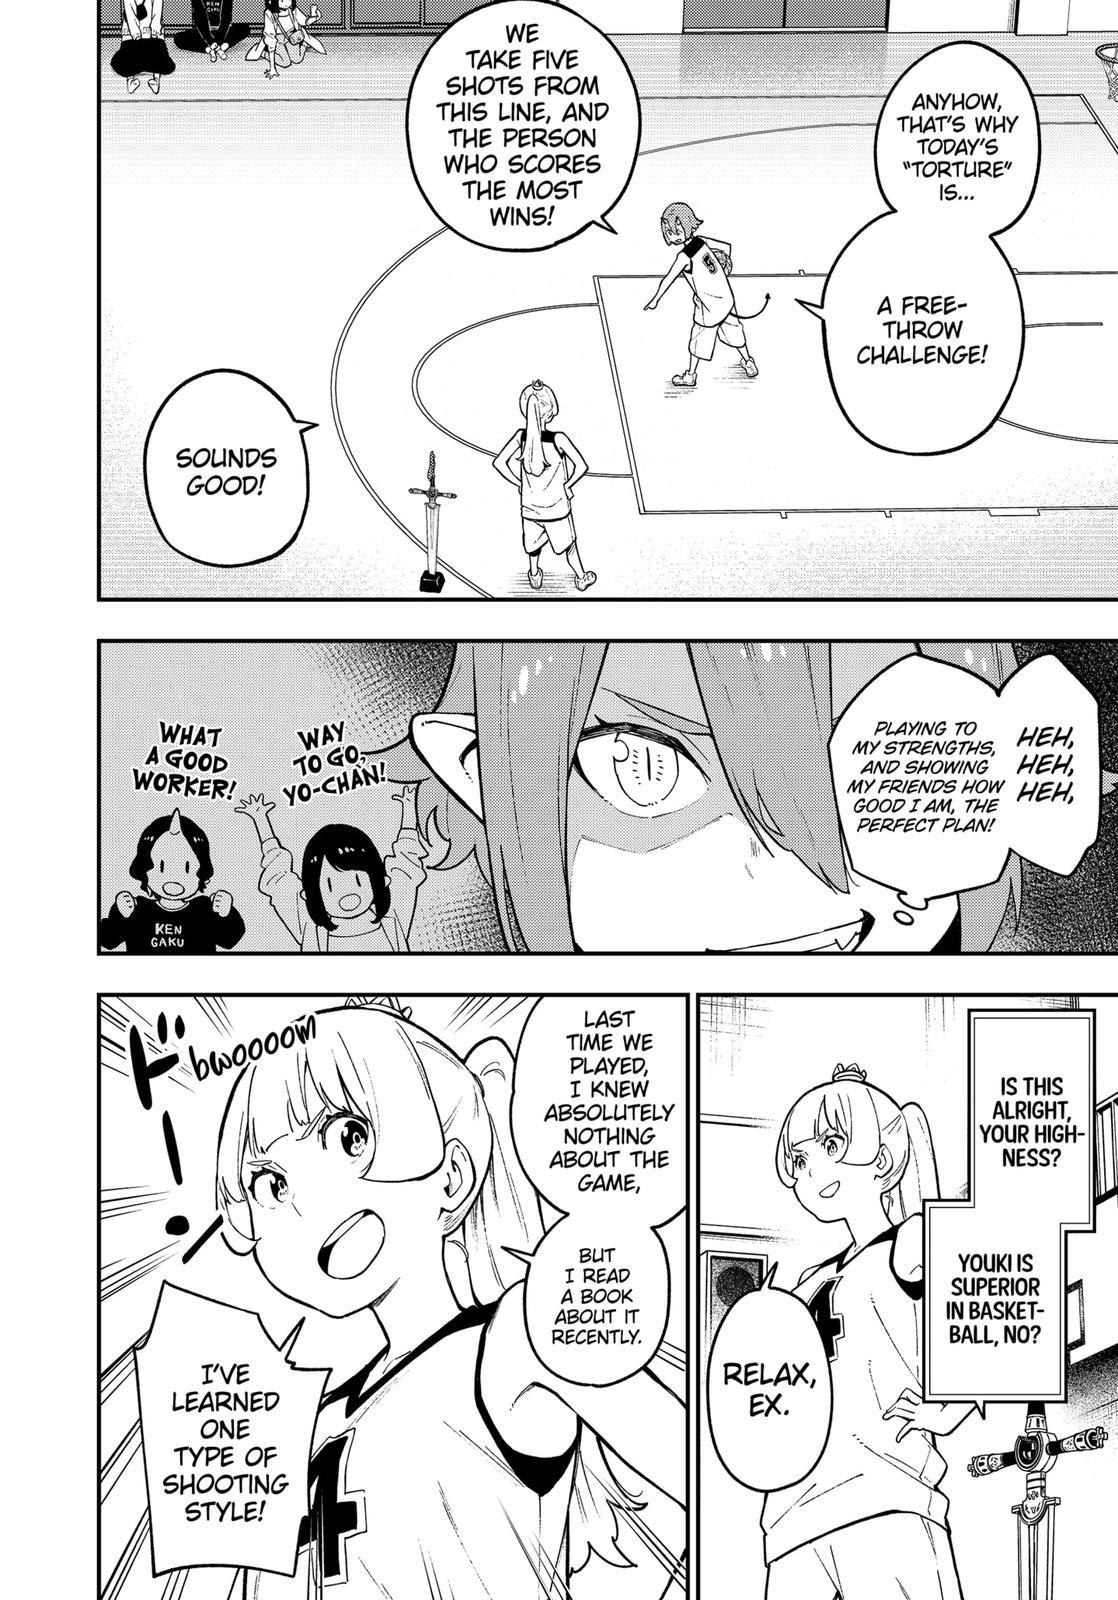 It's Time for "Interrogation", Princess! - chapter 81 - #2